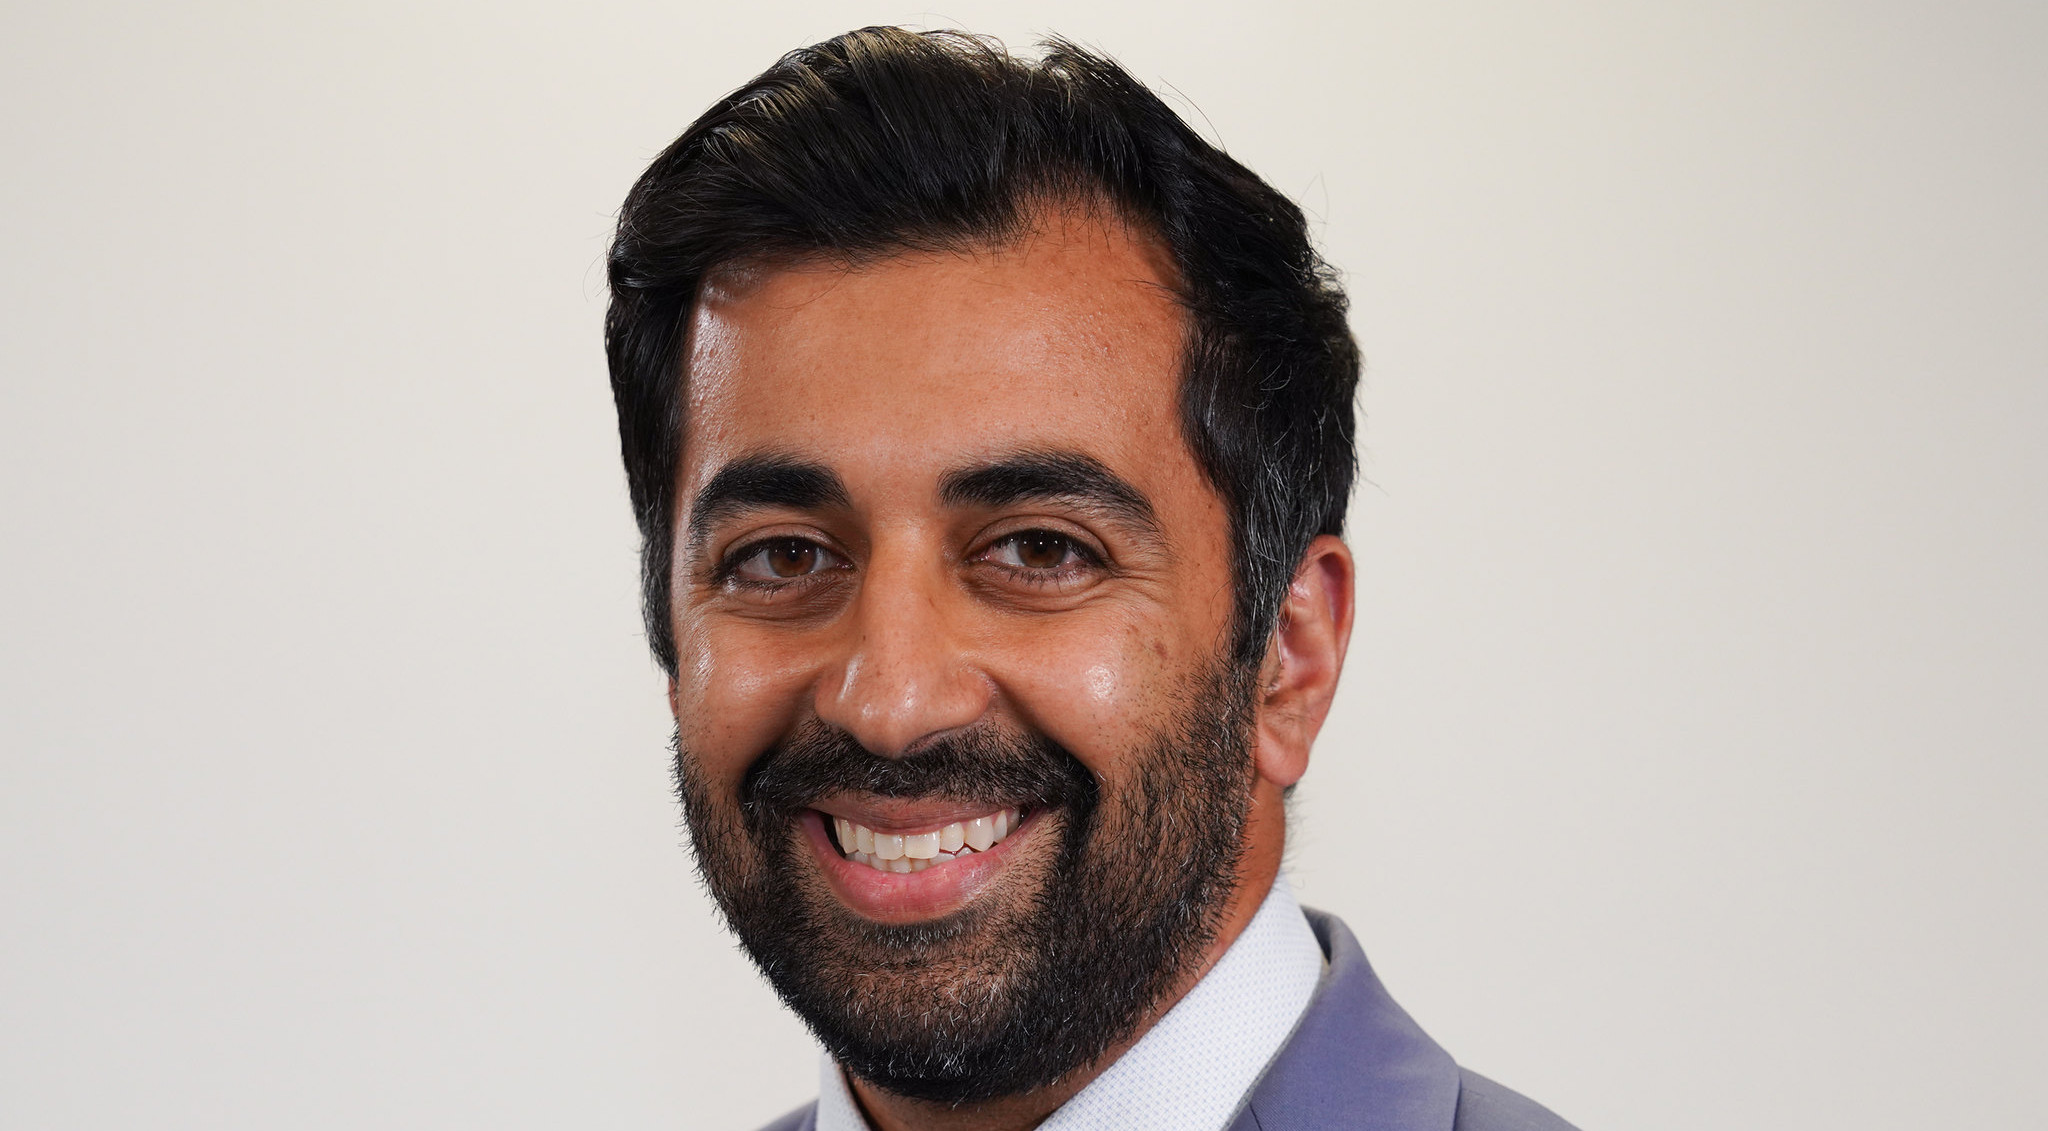 Humza Yousaf becomes first Muslim leader of Scotland